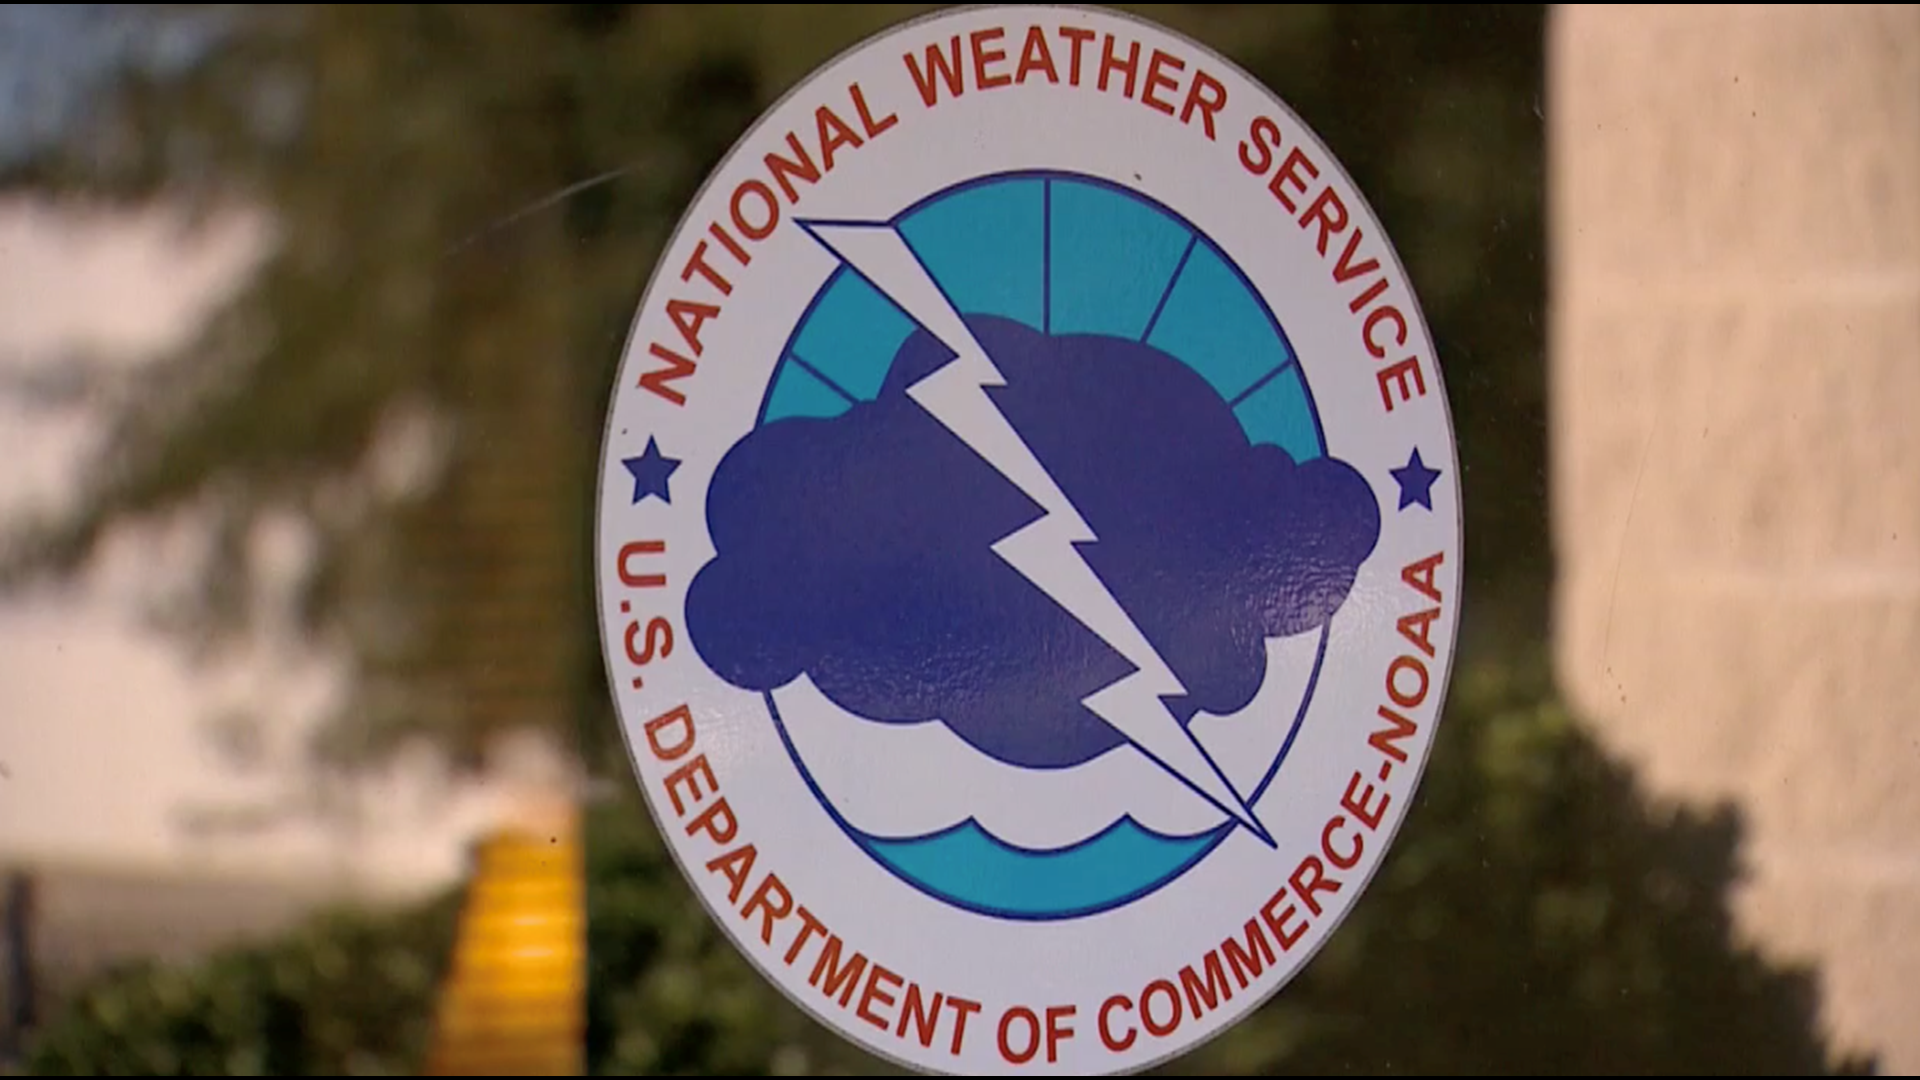 The National Weather Service provides alerts during severe weather and then examines snapshots of the aftermath to see how bad the damage is.